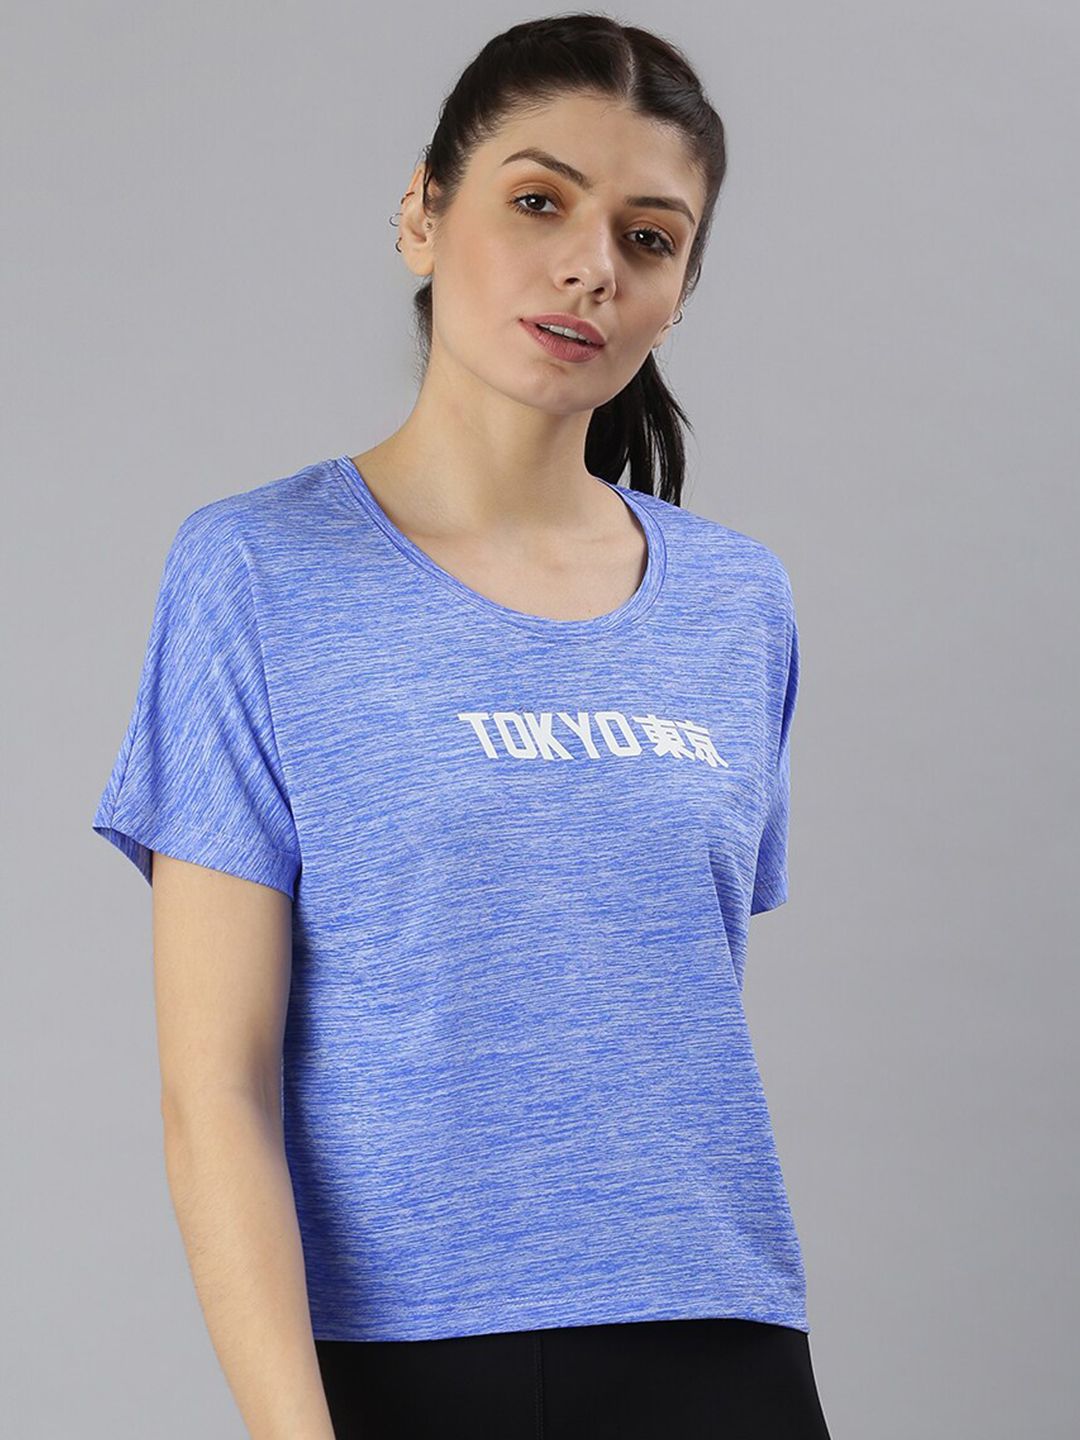 MKH Women Blue Typography Dri-FIT T-shirt Price in India